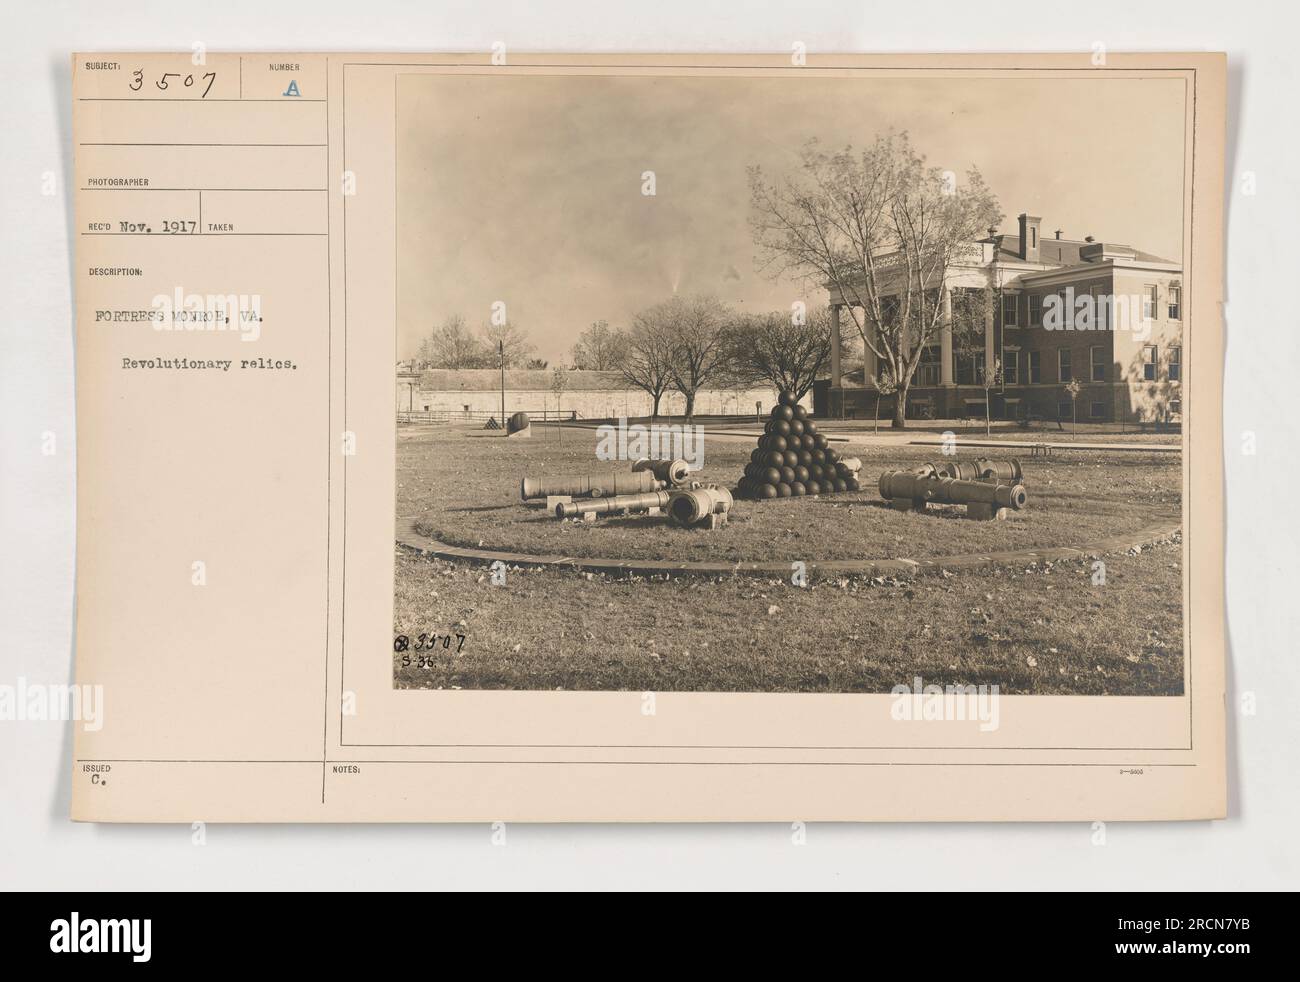 A photograph taken in 1917 at Fortress Monroe, Virginia, showcasing Revolutionary relics. This image is part of the collection labeled 111-SC-3507, captured by the photographer RECO Now. The description of the photo highlights the historical significance of Fortress Monroe and its connection to the American Revolution. Stock Photo